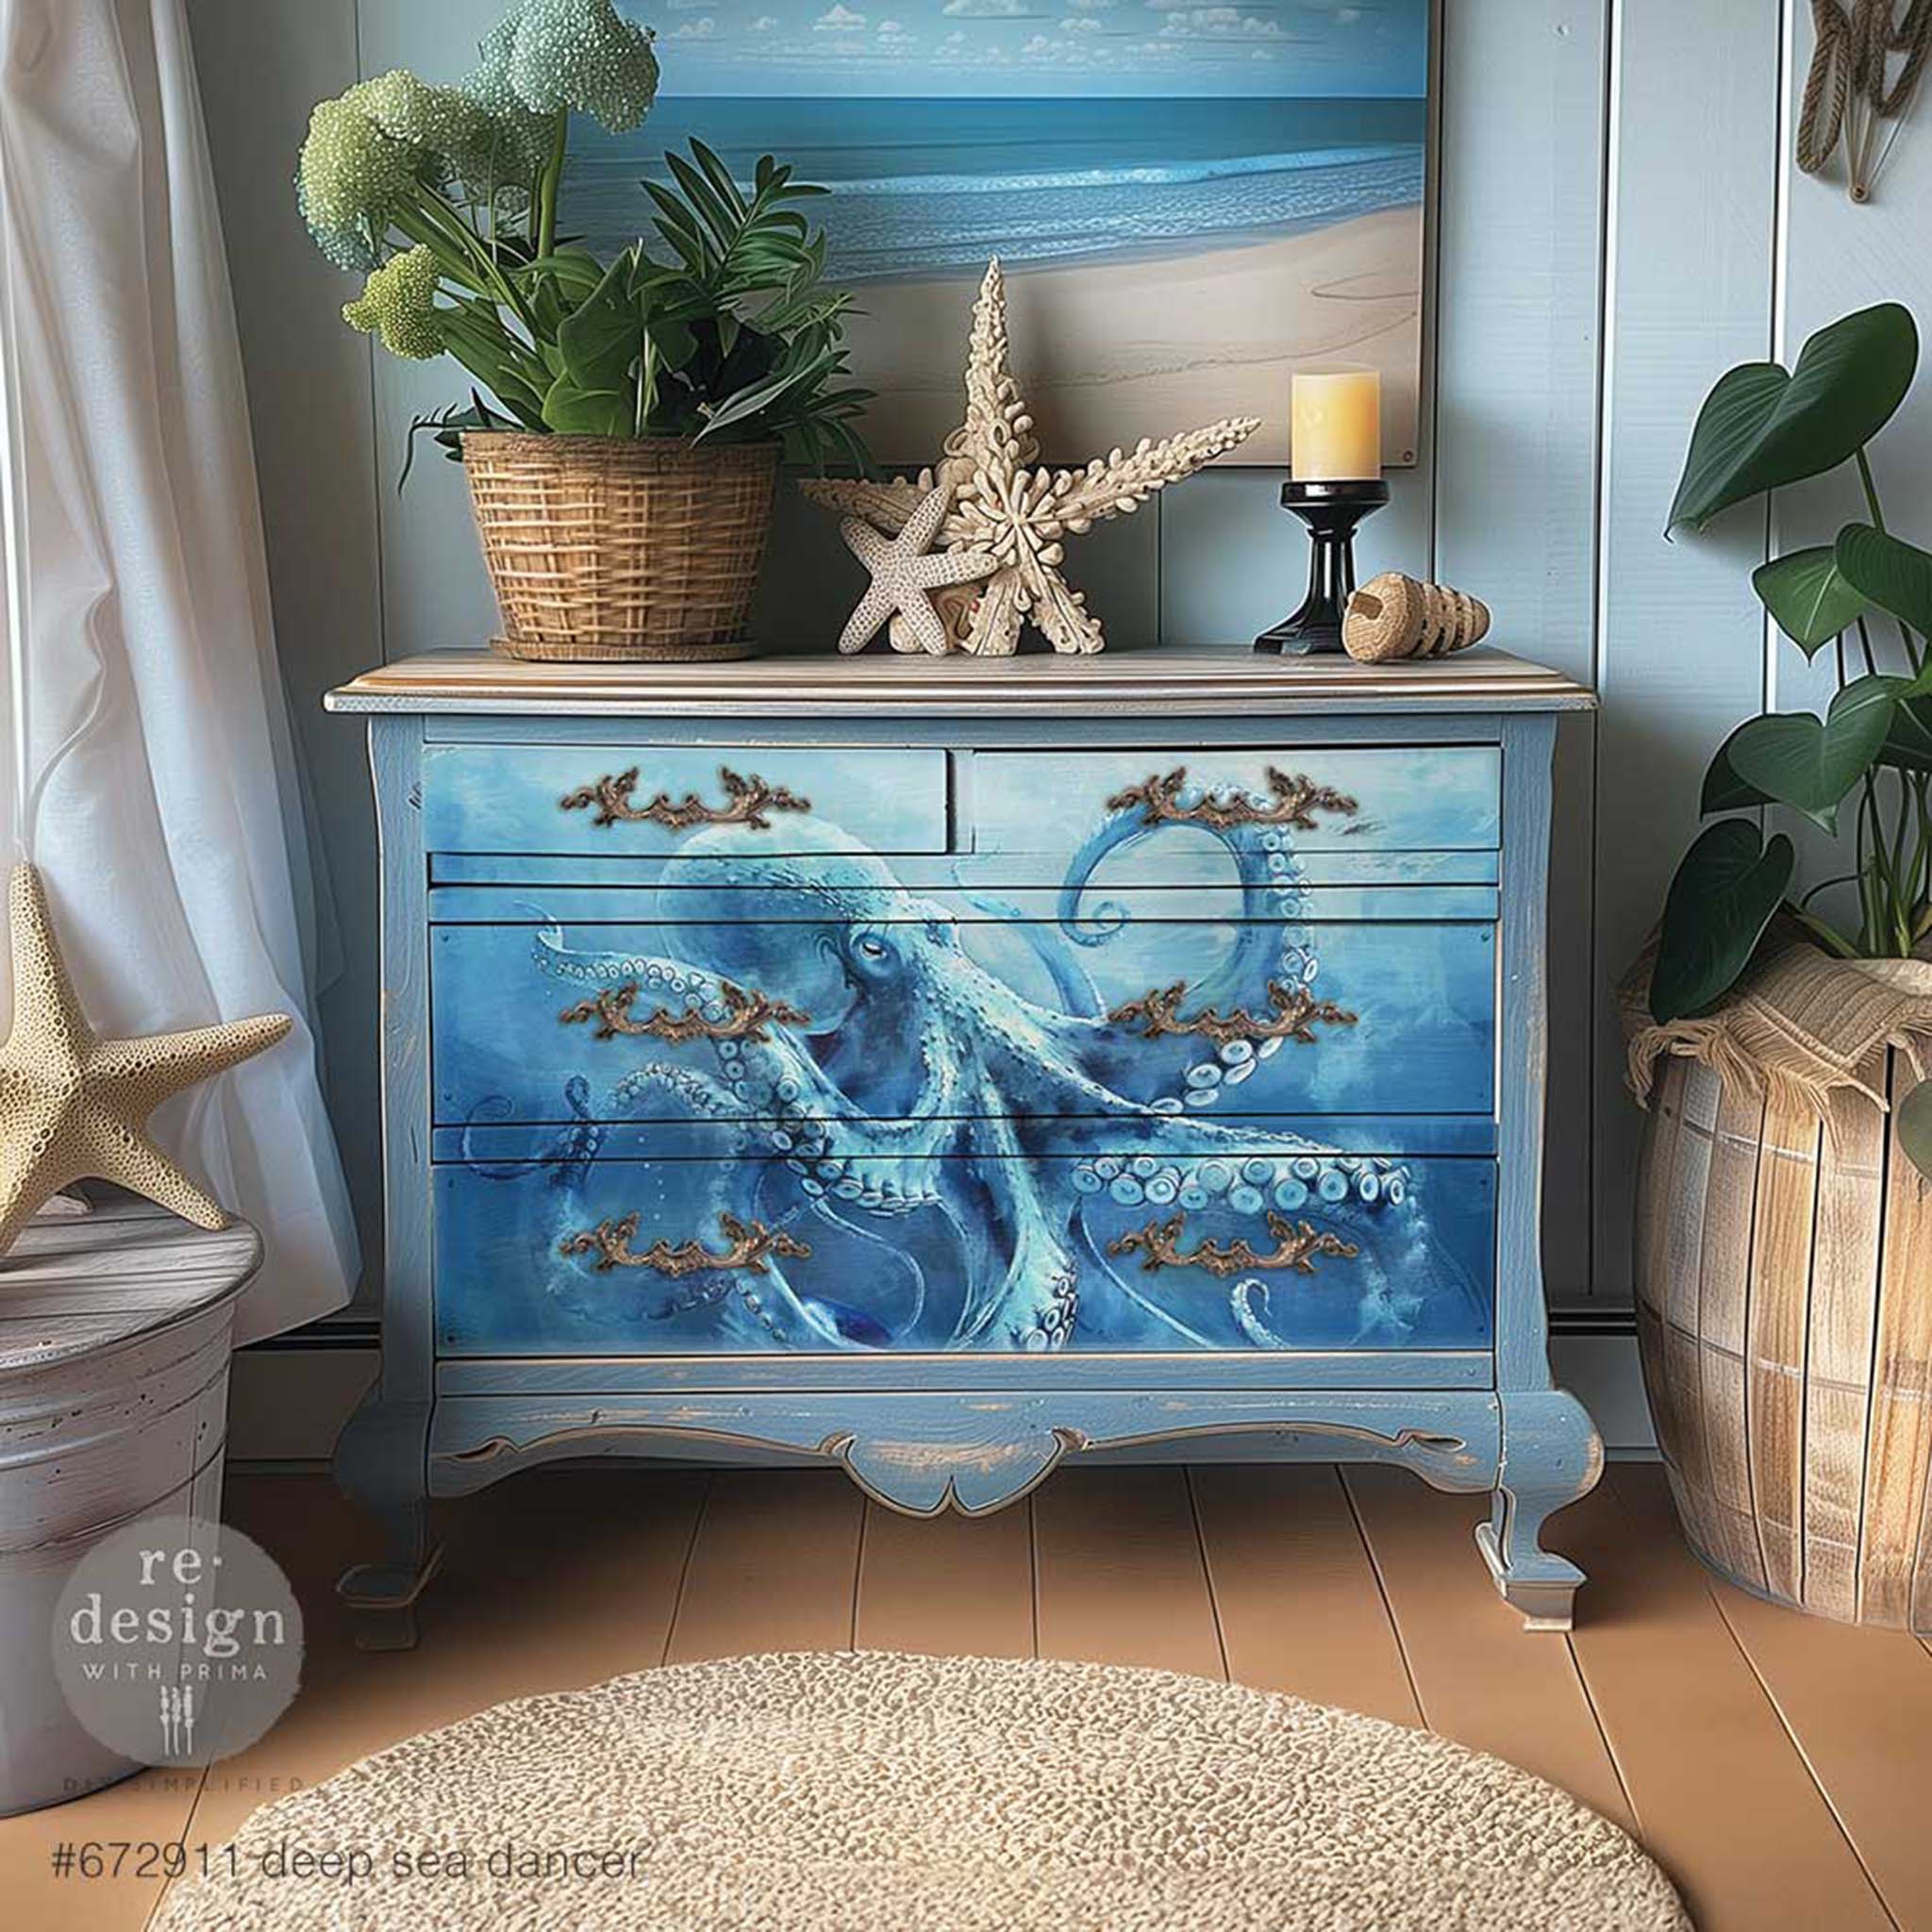 A 4-drawer dresser is painted light blue and features ReDesign with Prima's Deep Sea Dancer A1 fiber paper on its drawers.